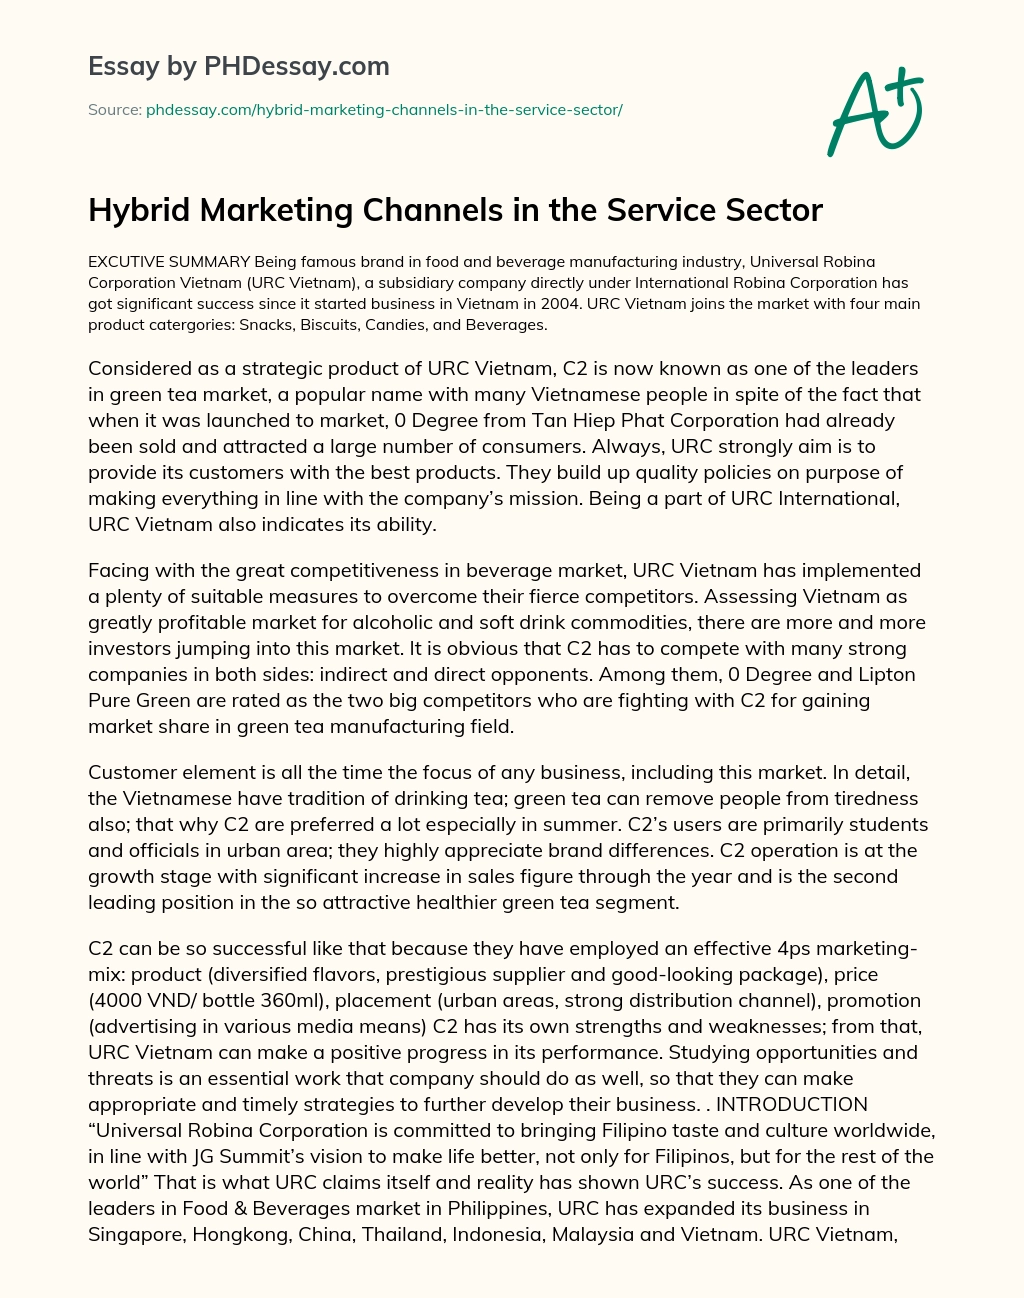 Hybrid Marketing Channels in the Service Sector essay